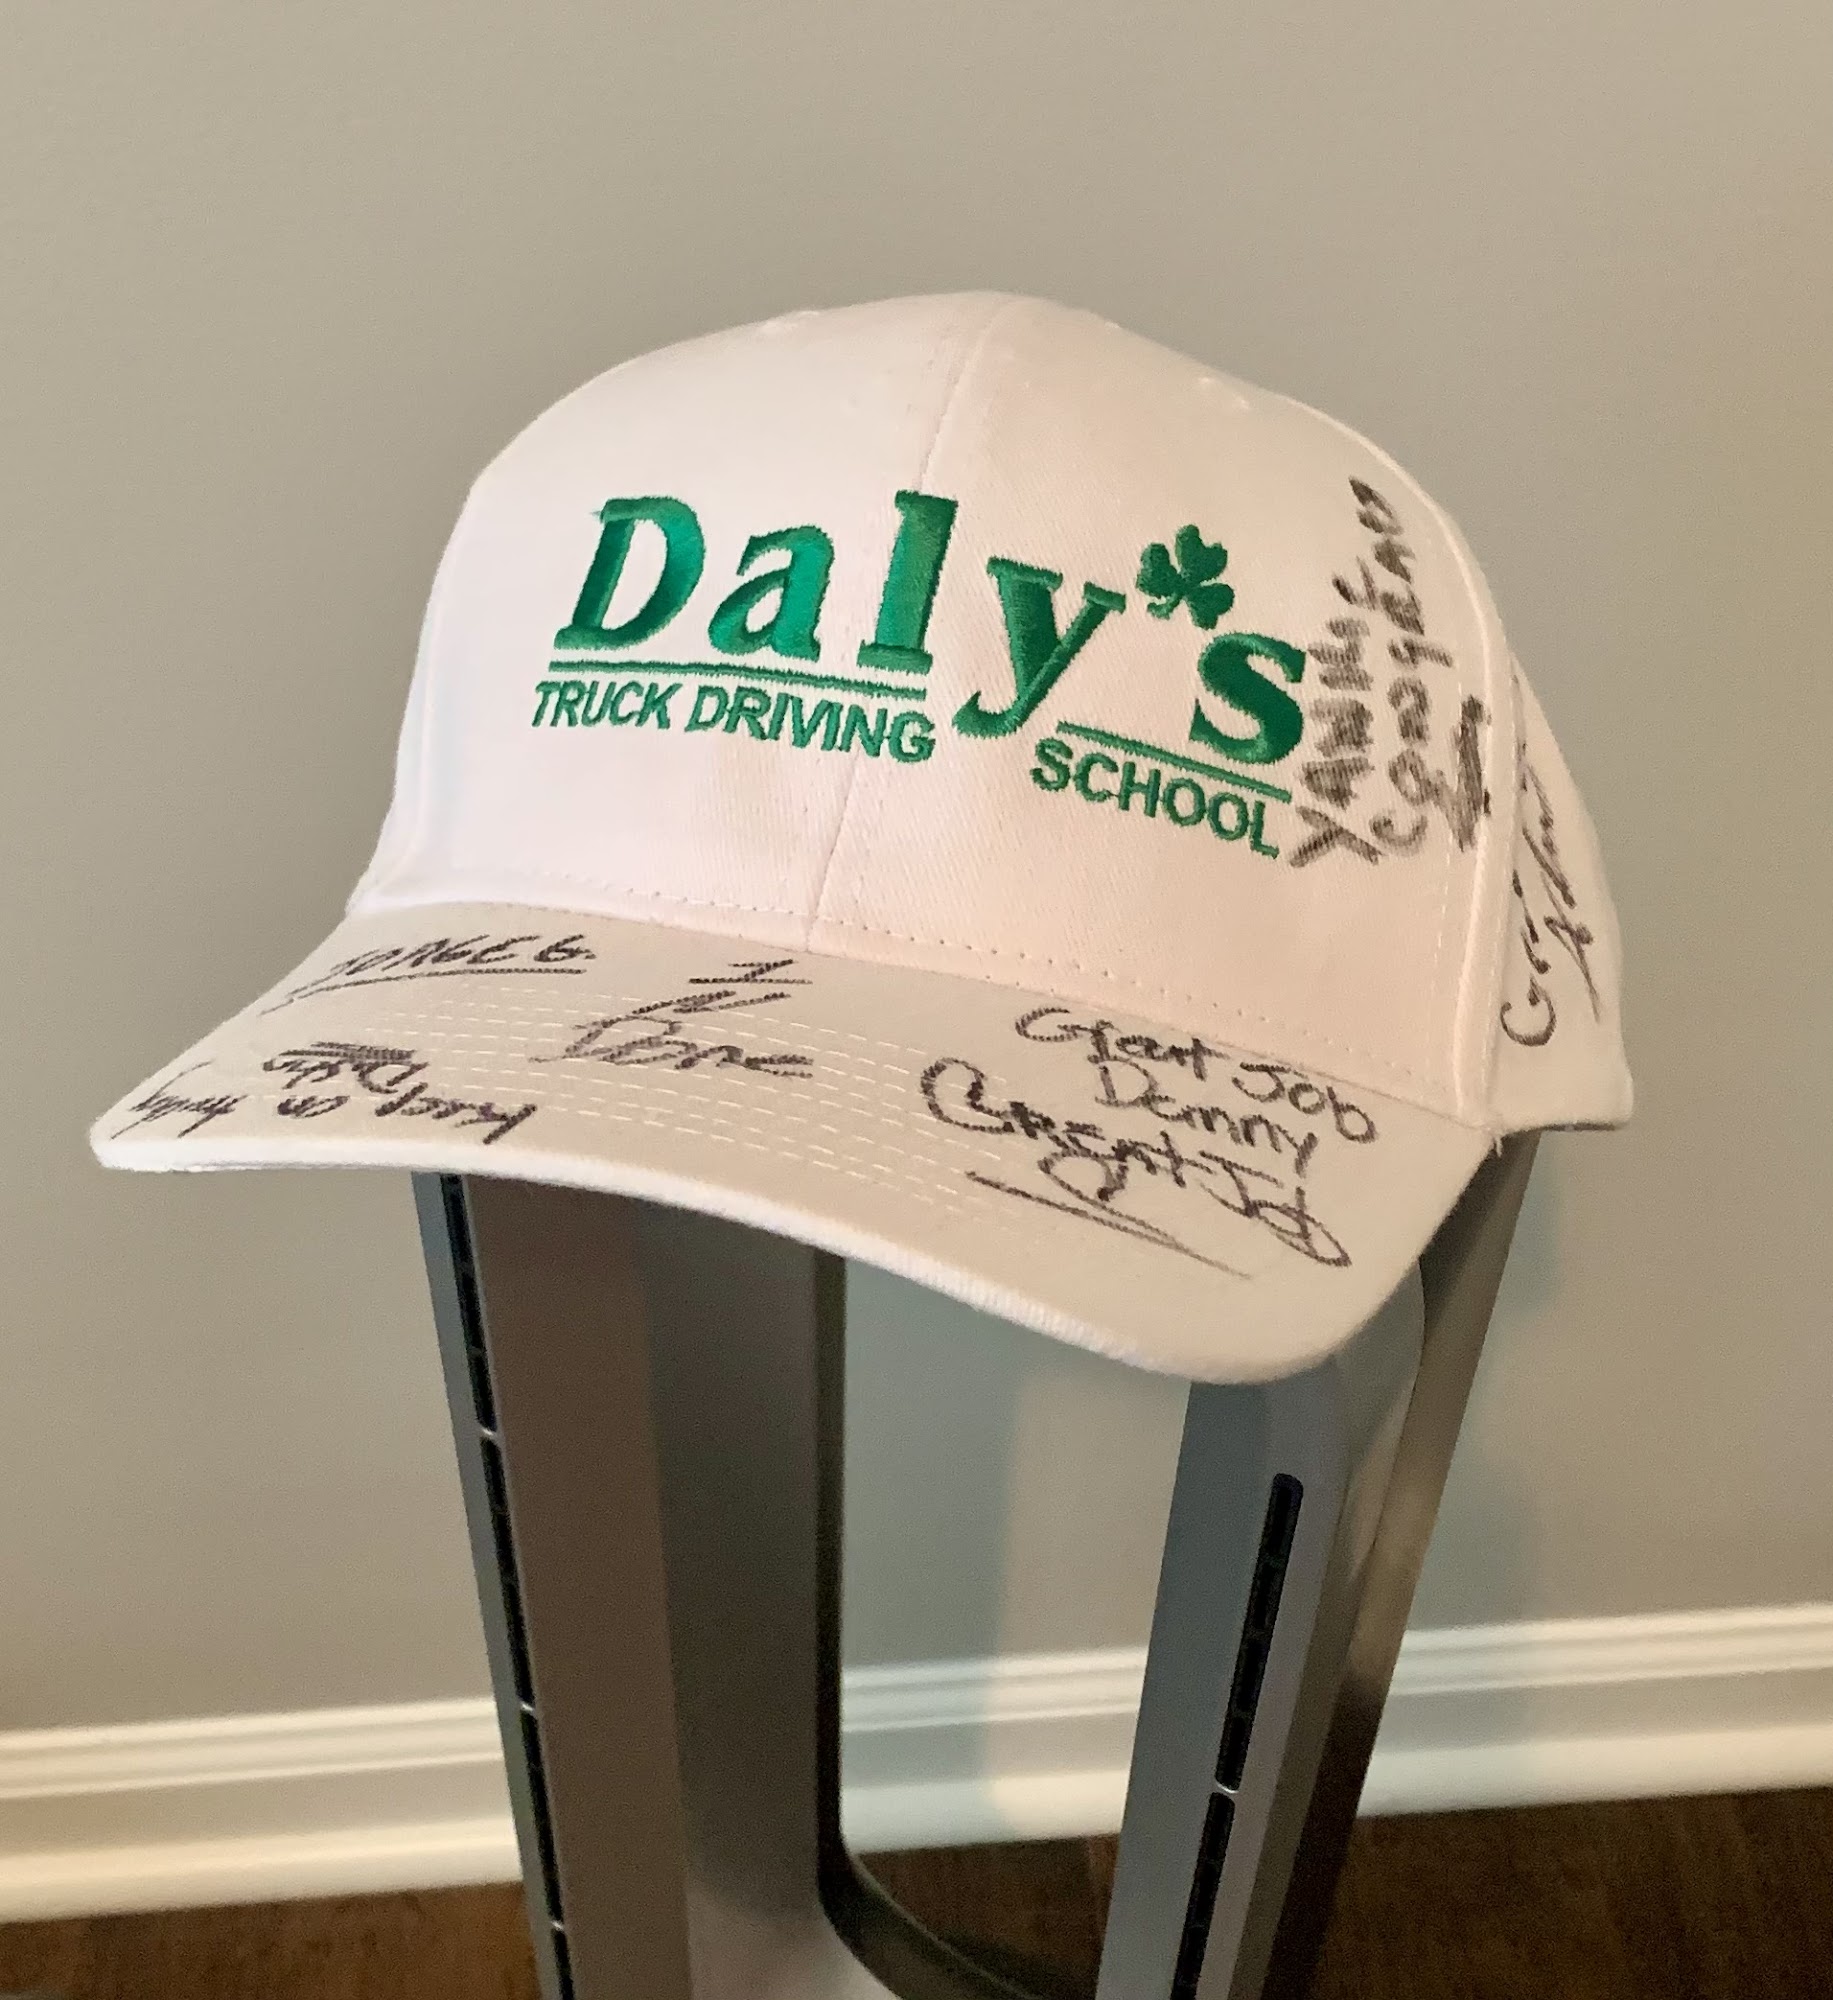 Daly’s Truck Driving School